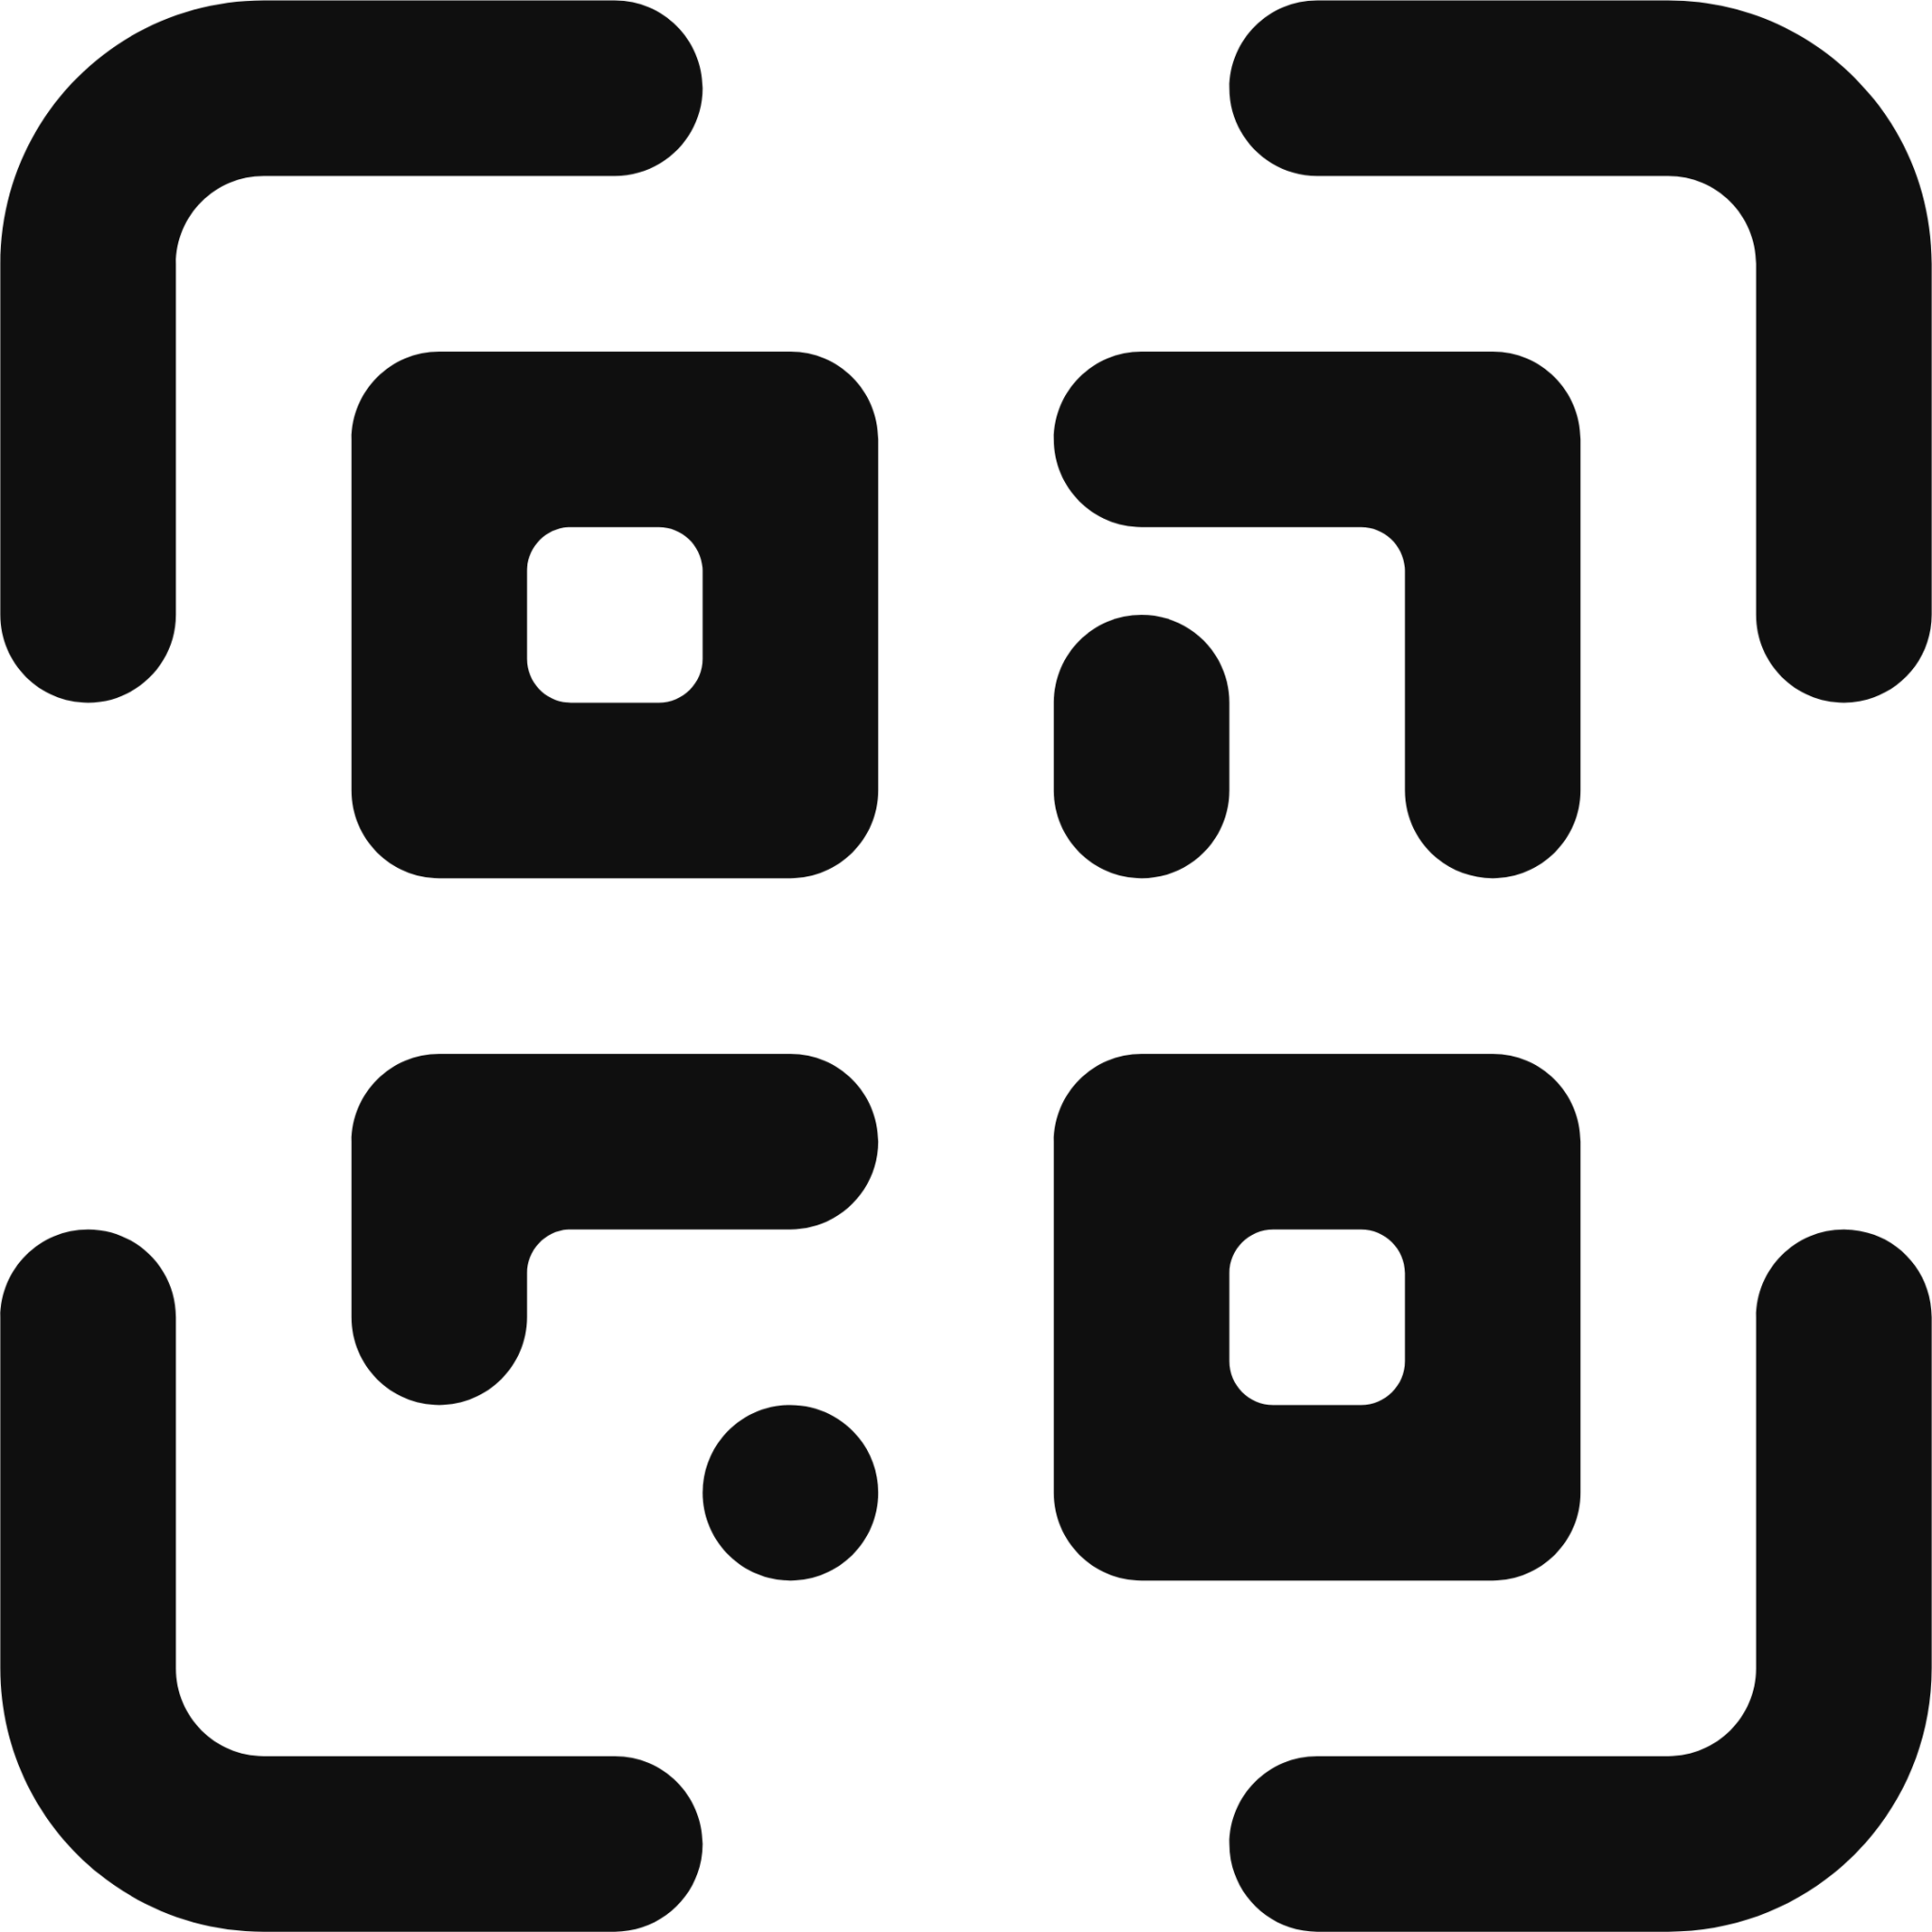 qr scan icon